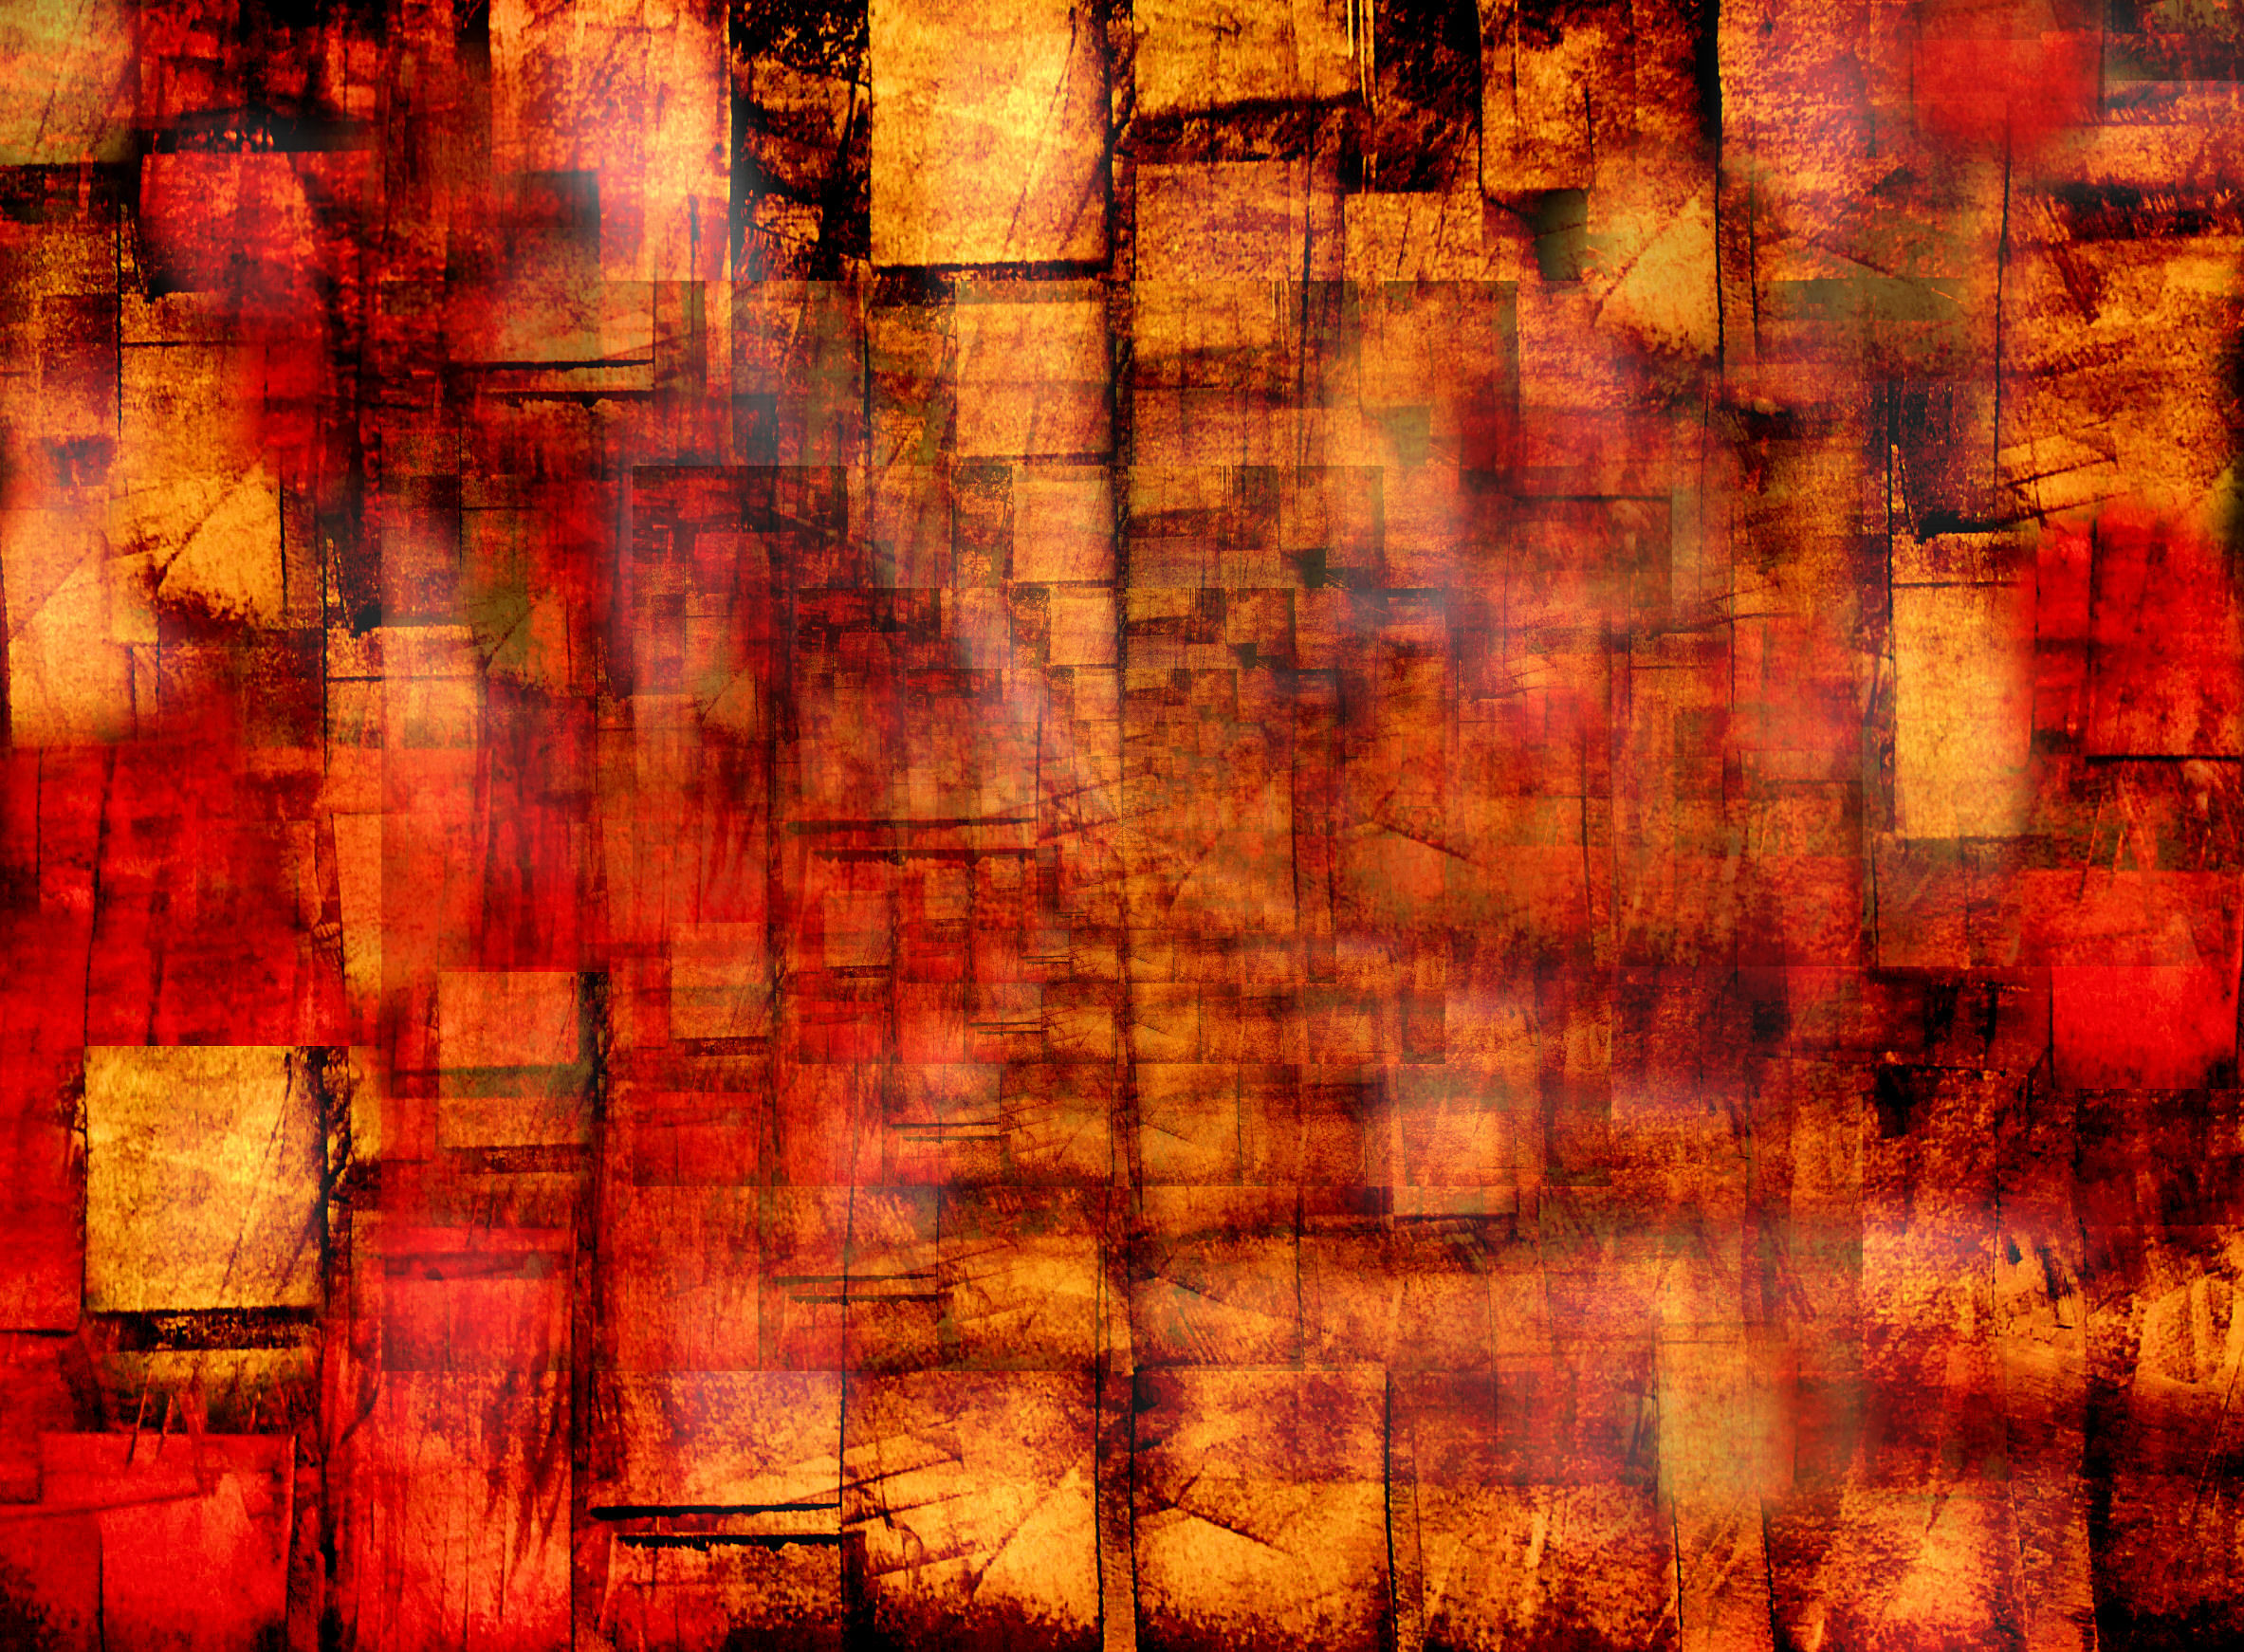  file of Abstract artistic wallpaper   red and gold HD Wallpaper 2366x1742